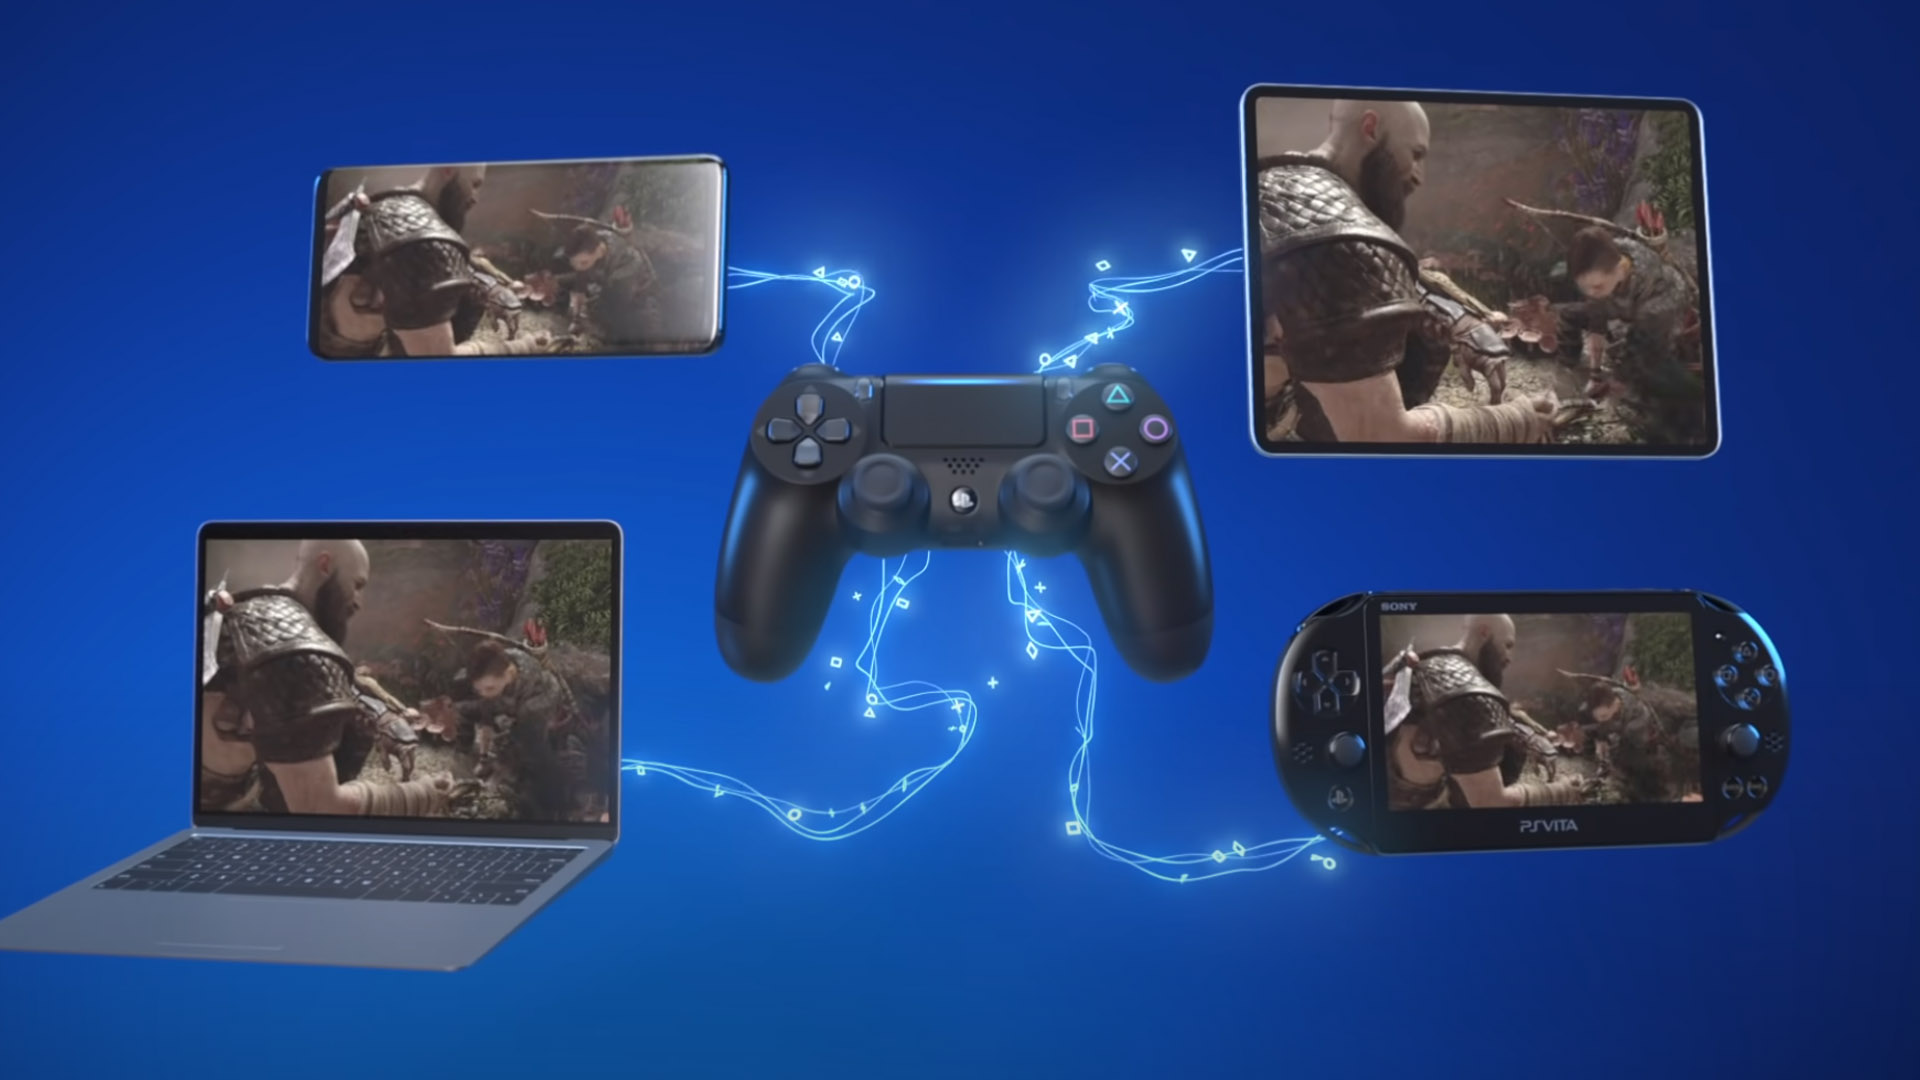 How to Setup Remote Play PS4 To PC